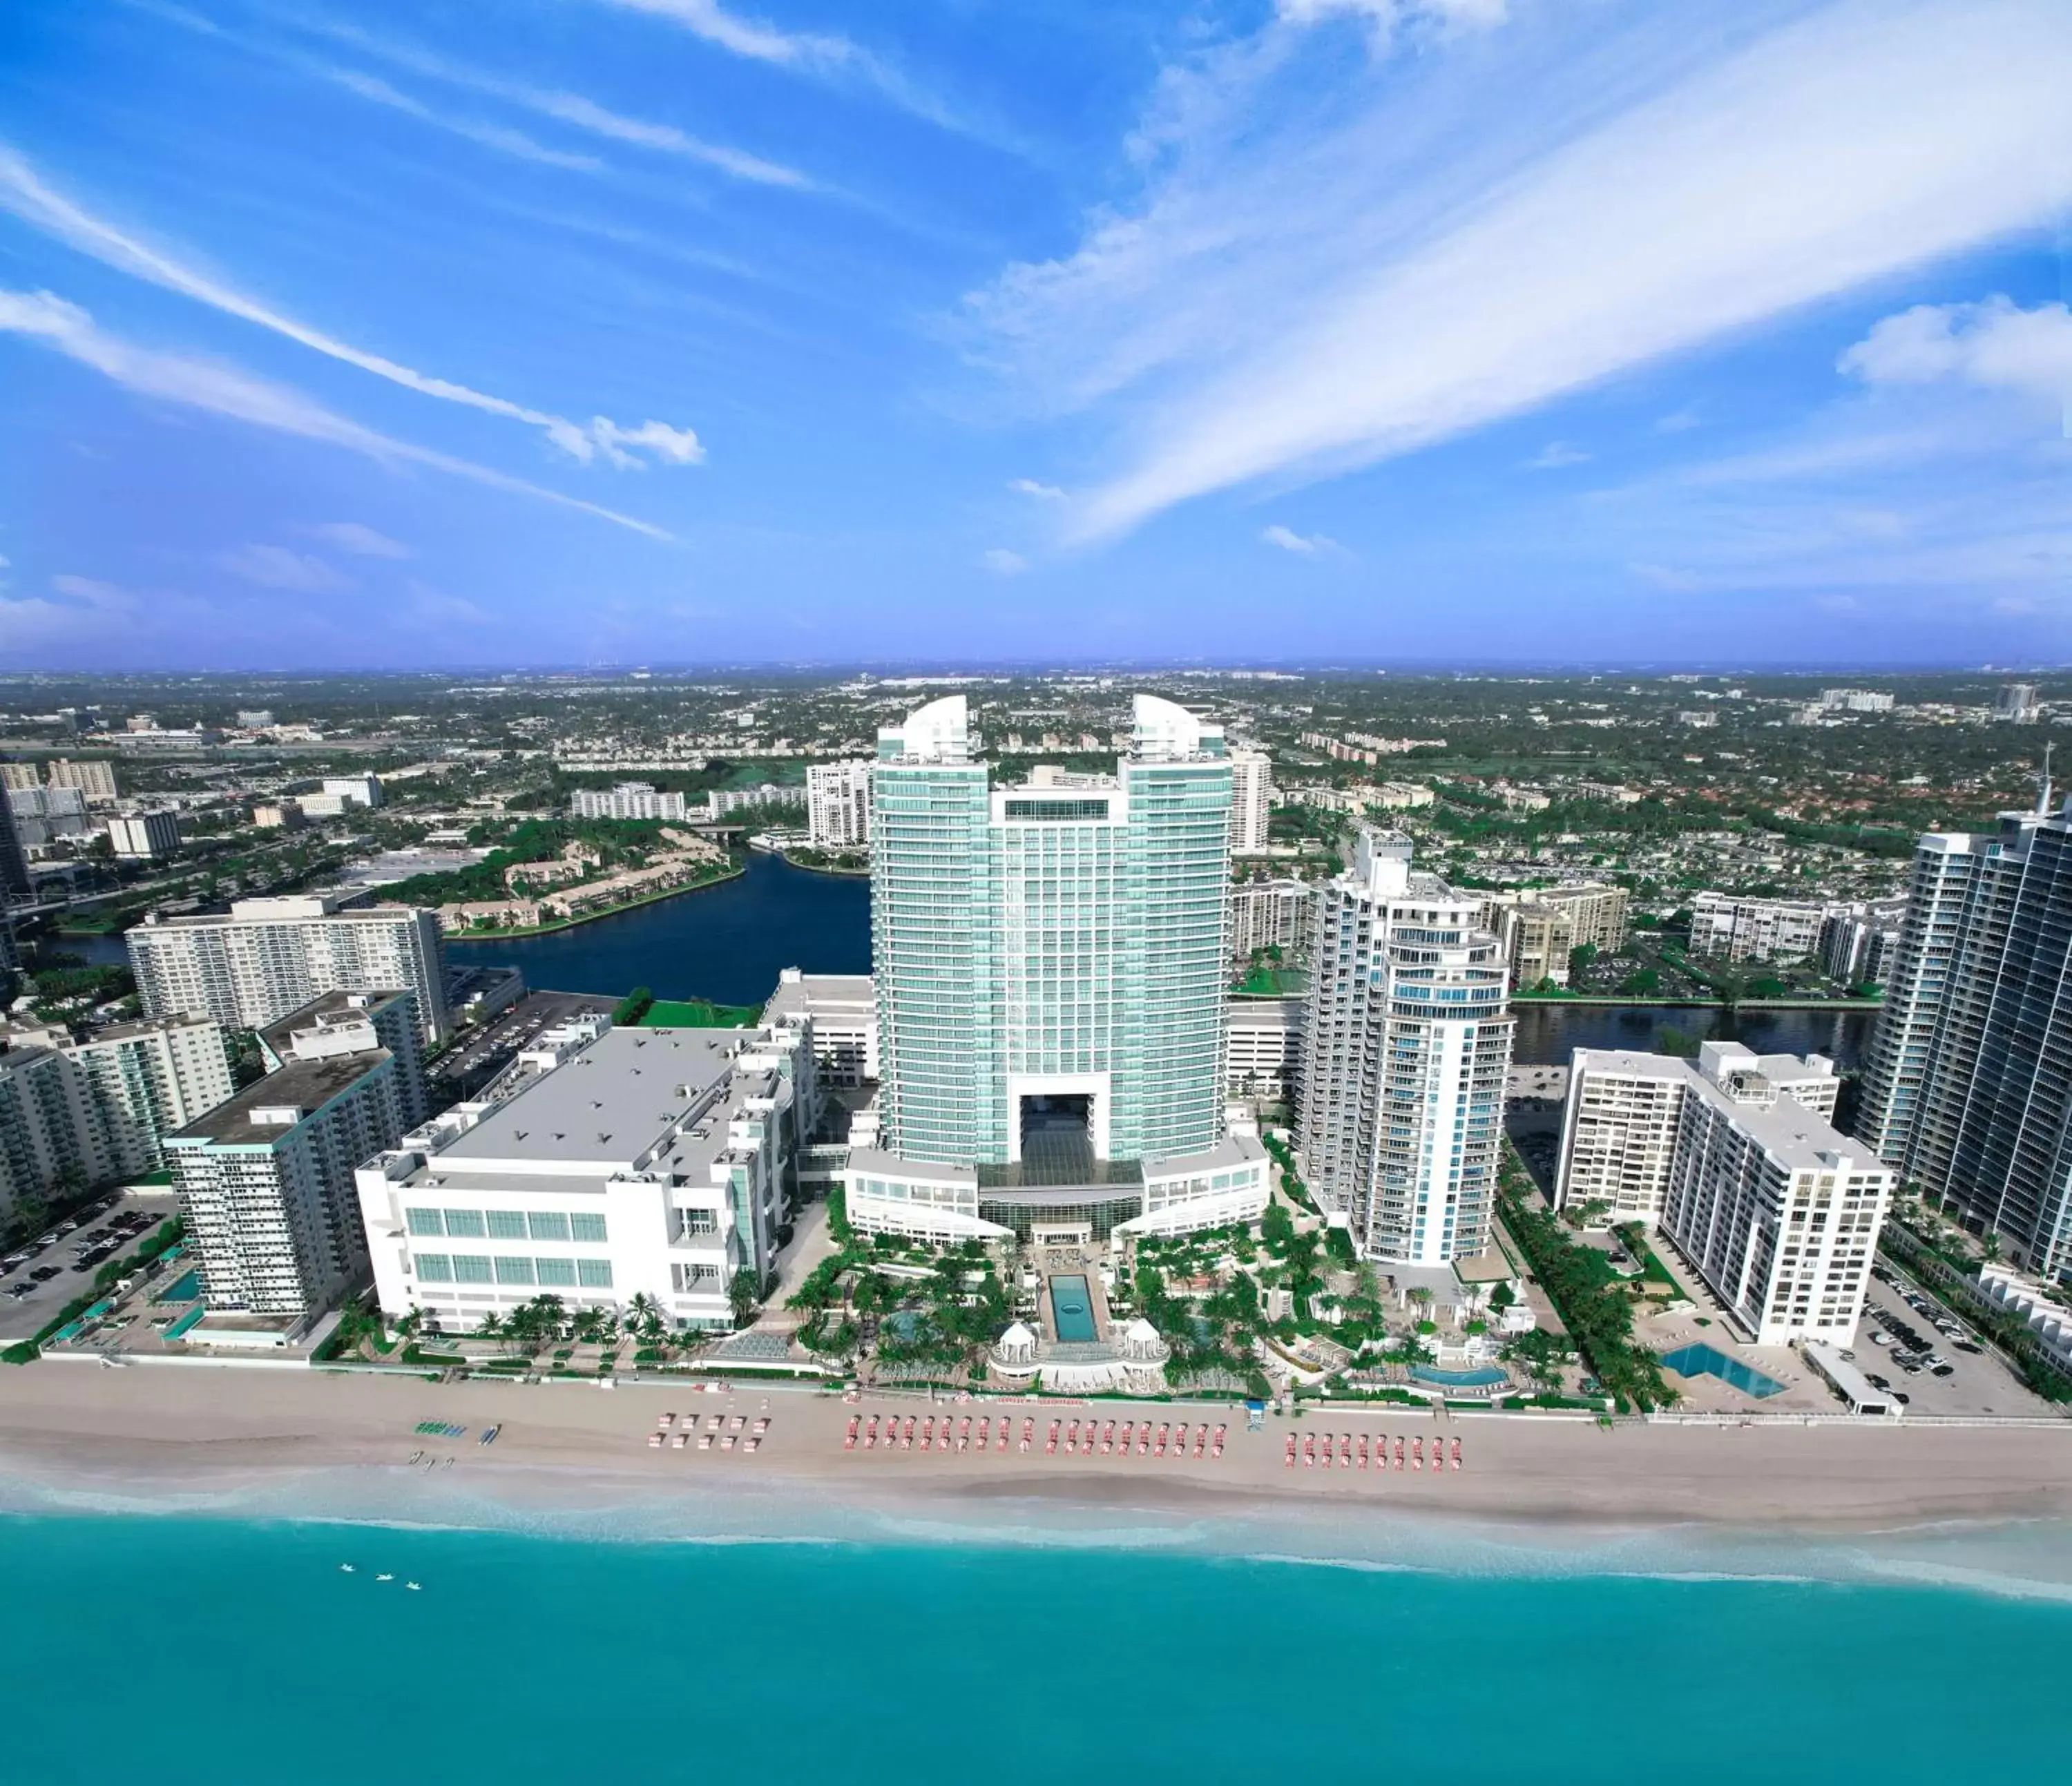 Property building, Bird's-eye View in The Diplomat Beach Resort Hollywood, Curio Collection by Hilton